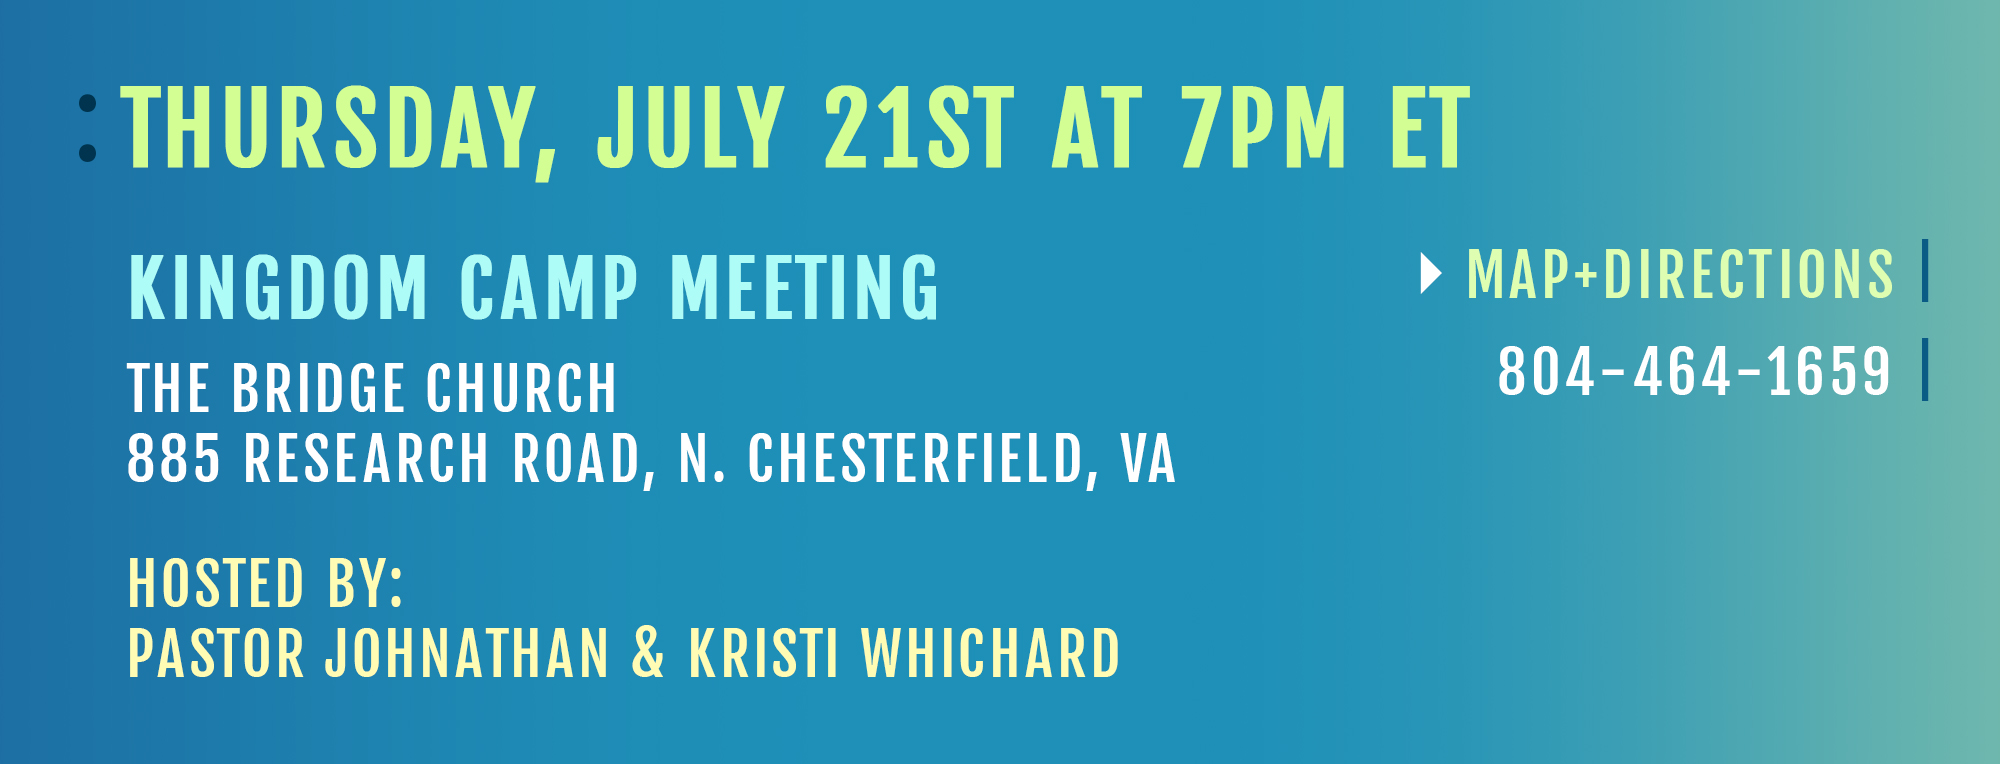 Thursday, July 21st st 7:00 pm ET Kingdom Camp Meeting The Bridge Church 885 Research Road, N. Chesterfield, VA Map + Directions 804-464-1659